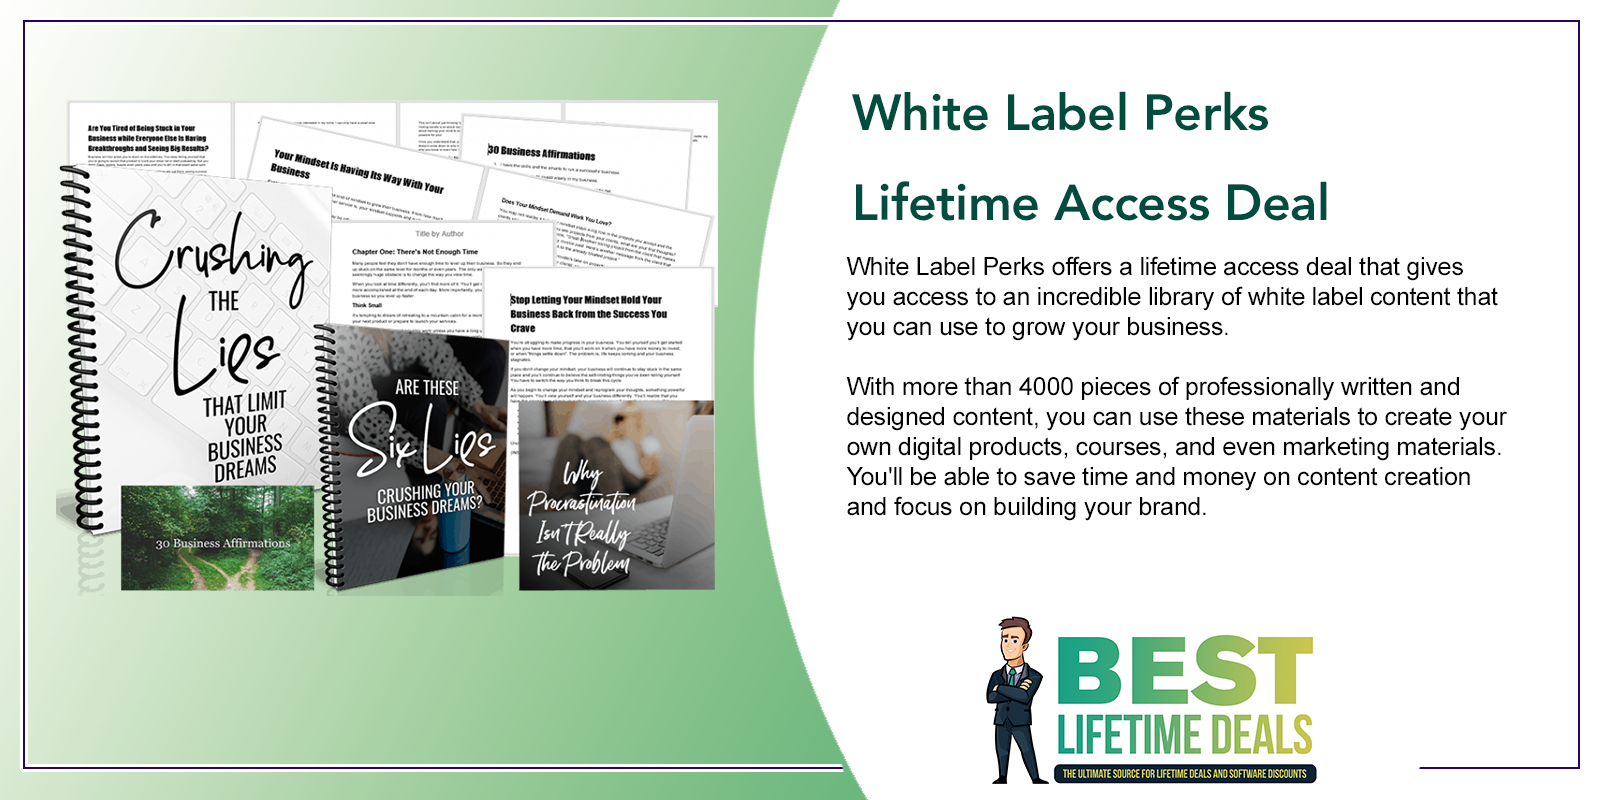 White Label Perks Lifetime Access Deal Featured Image